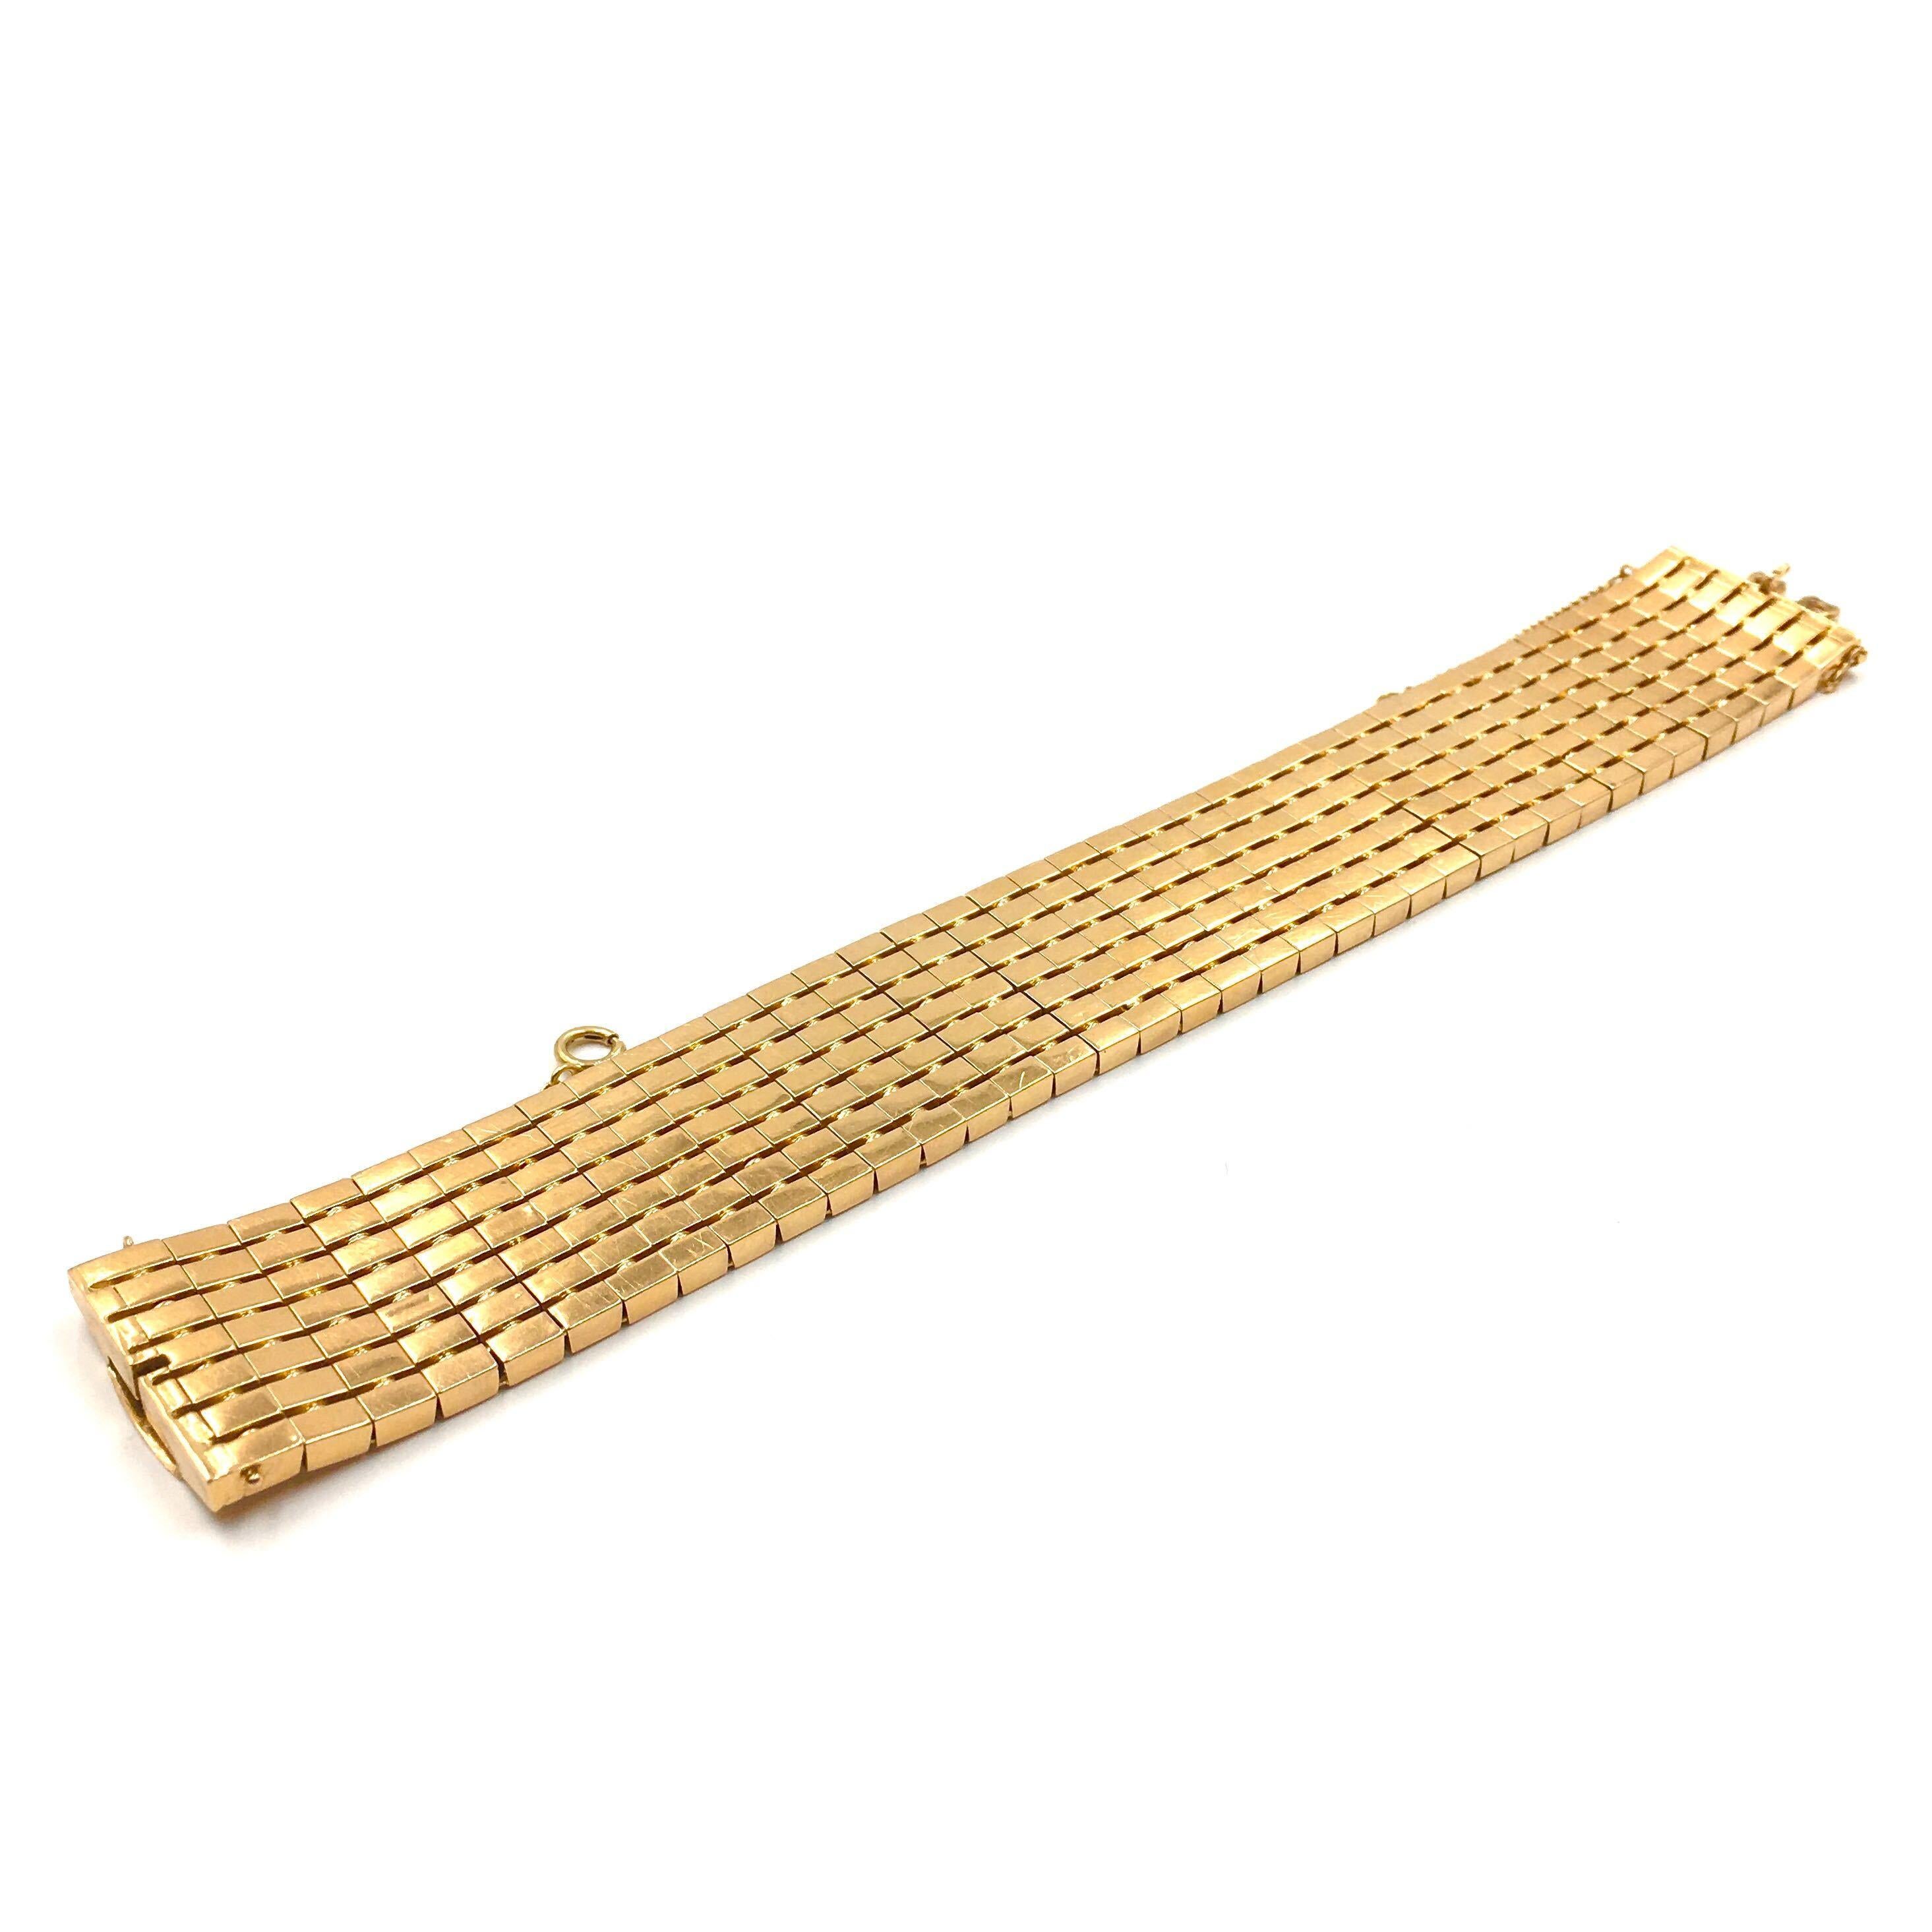 An 18 karat yellow gold bracelet.  Circa 1950.  The 1 inch wide bracelet is composed of flexibly attached small rectangular panels.  Length approximately 7 3/8 inches.  Gross weight approximately 71.9 grams.